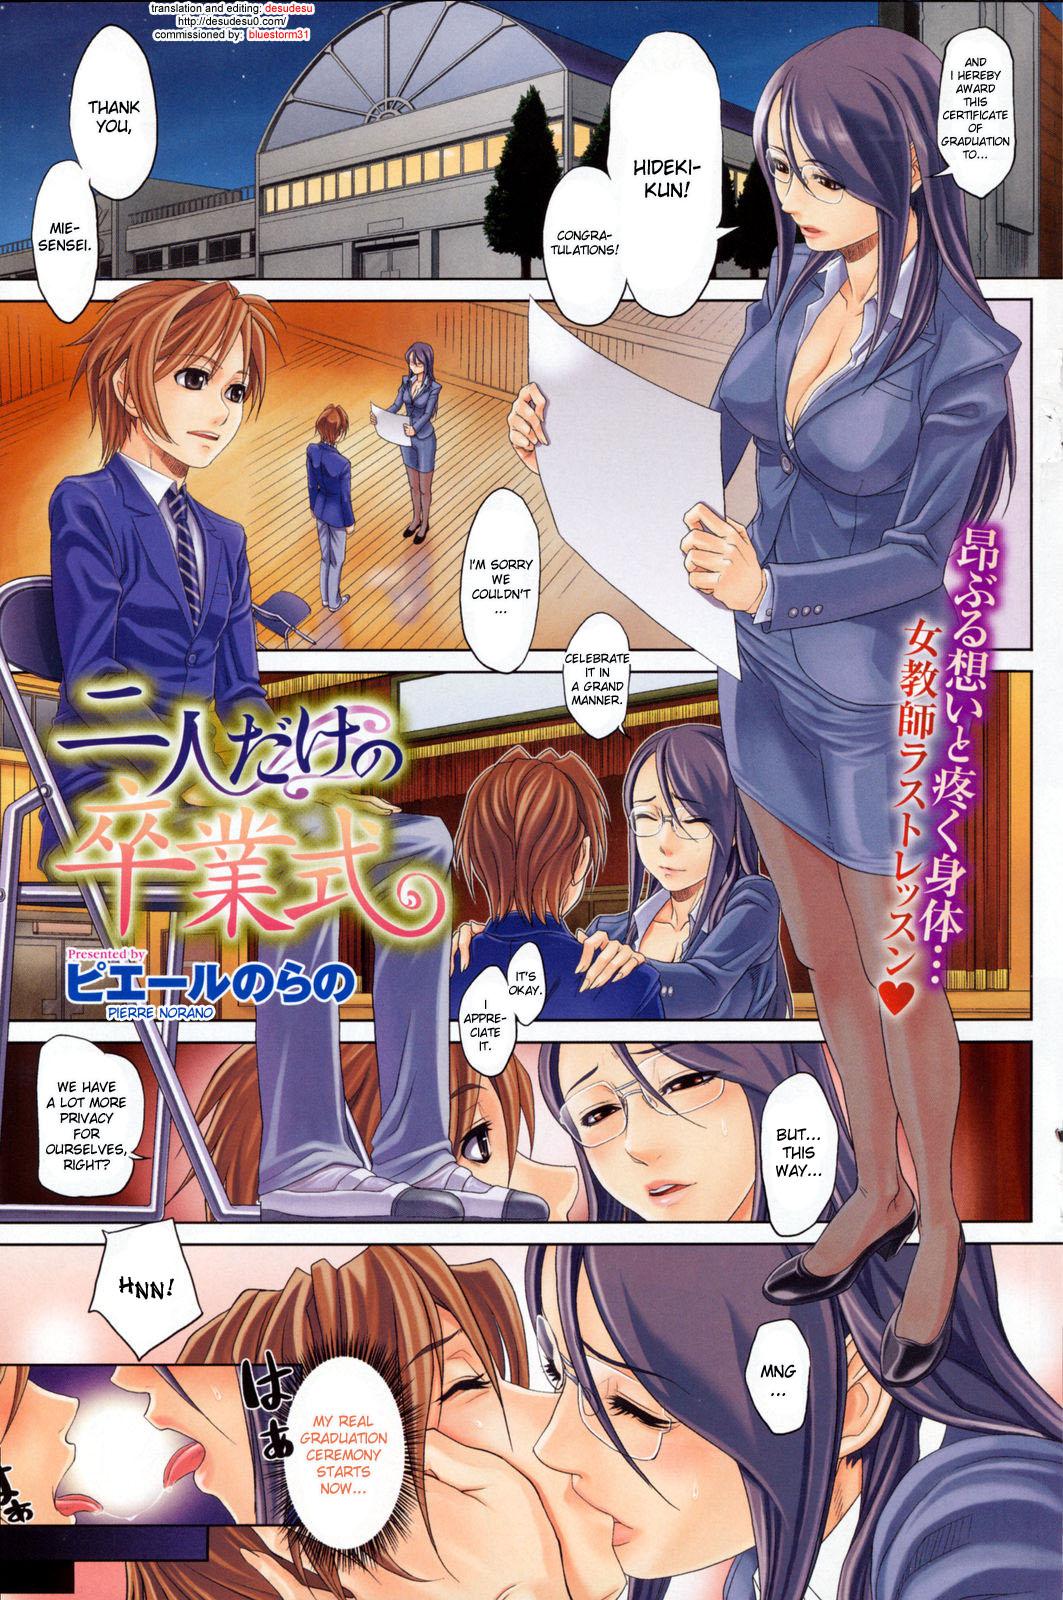 Futari Dake no Sotsugyoushiki | A Graduation Ceremony Just for the Two of Us 0